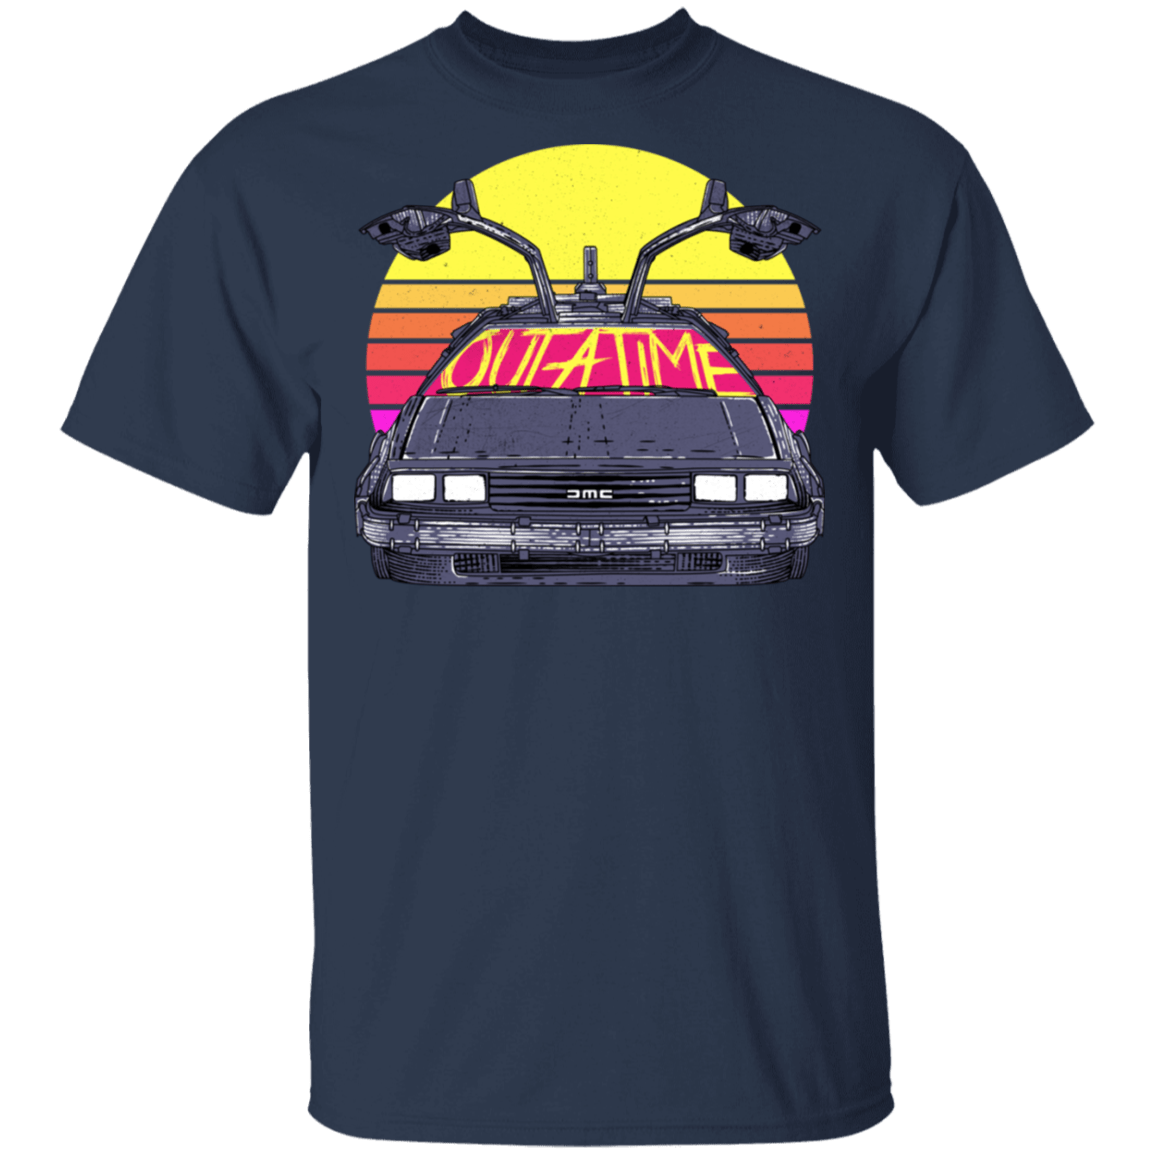 T-Shirts Navy / S Outatime In The 80s T-Shirt